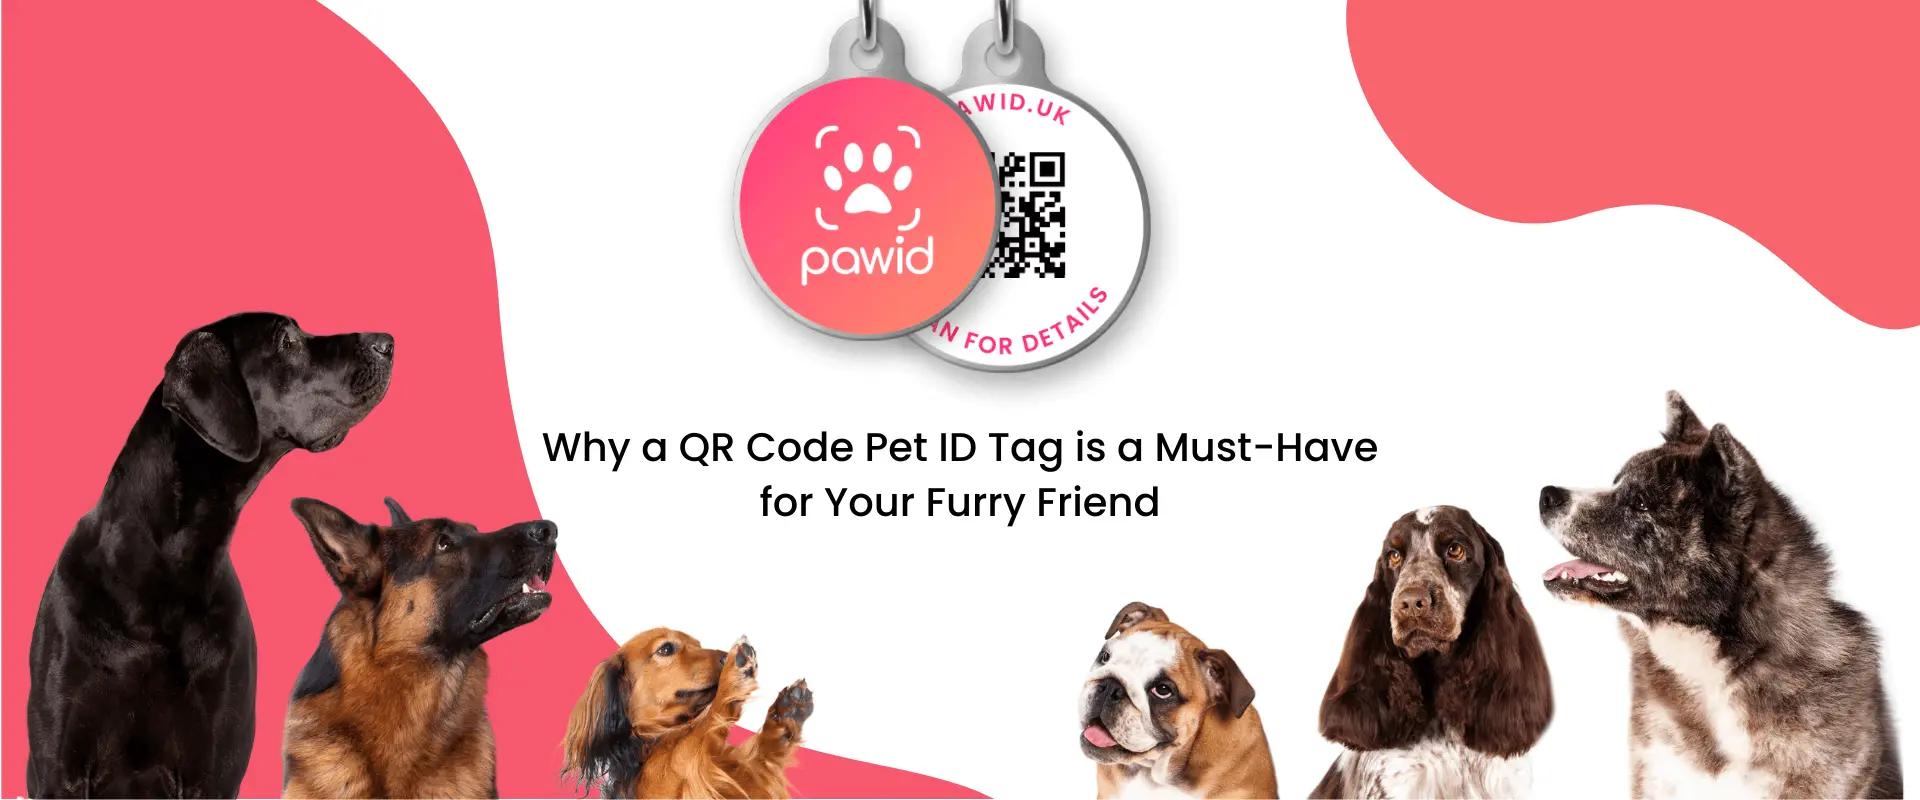 Why a QR Code Pet ID Tag is a Must-Have for Your Furry Friend